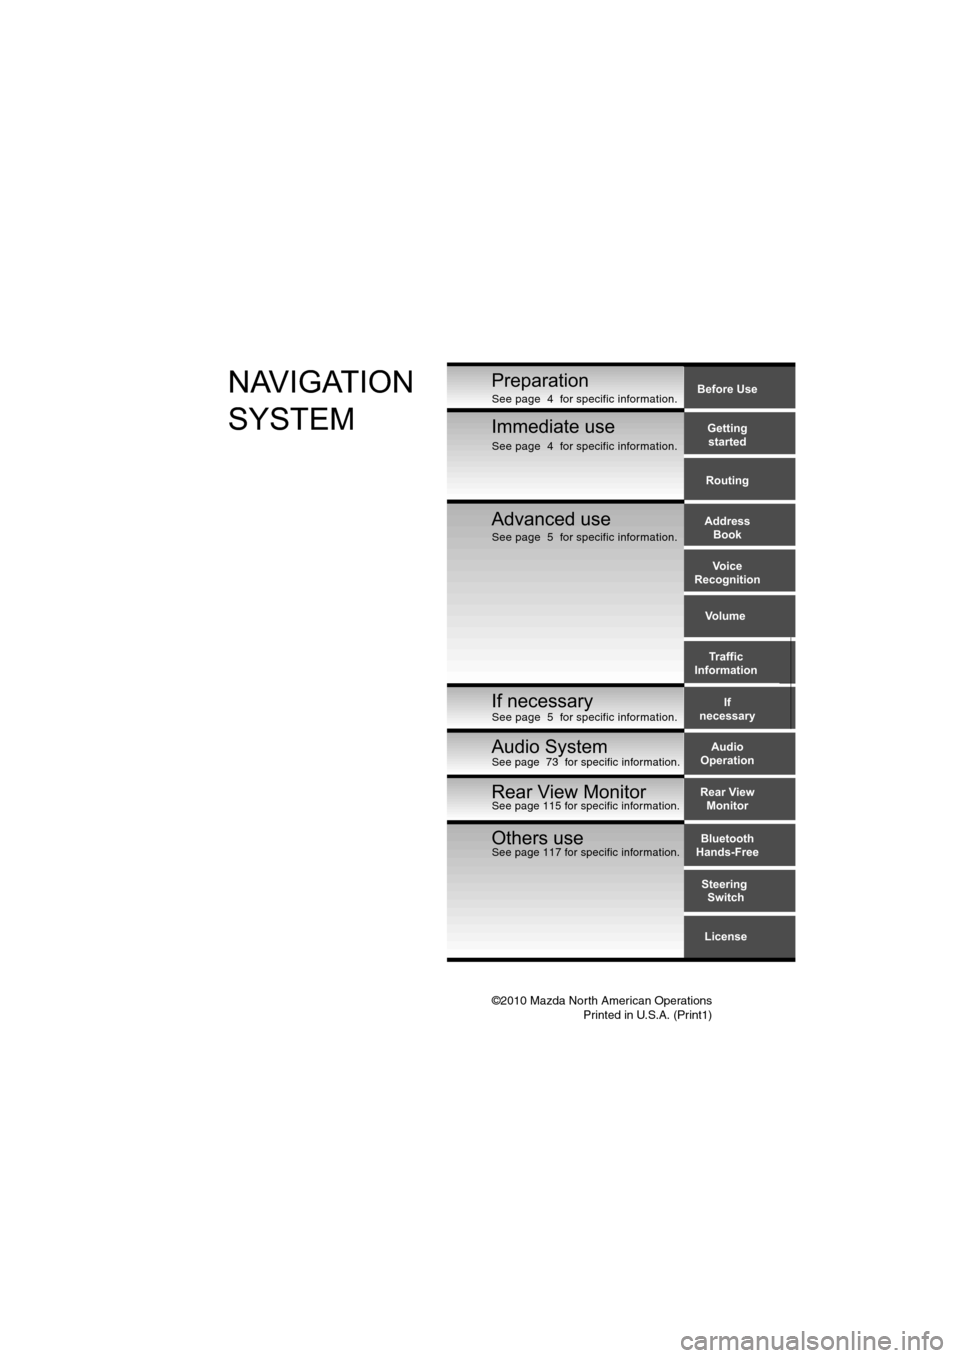 MAZDA MODEL 6 2012  Navigation Manual (in English) ©2010 Mazda North American OperationsPrinted in U.S.A. (Print1)
Before Use
Gettingstarted
Routing
Address Book
Voice 
Recognition
Volume
If
necessary Traffic
InformationPreparationNAVIGATION 
SYSTEM
